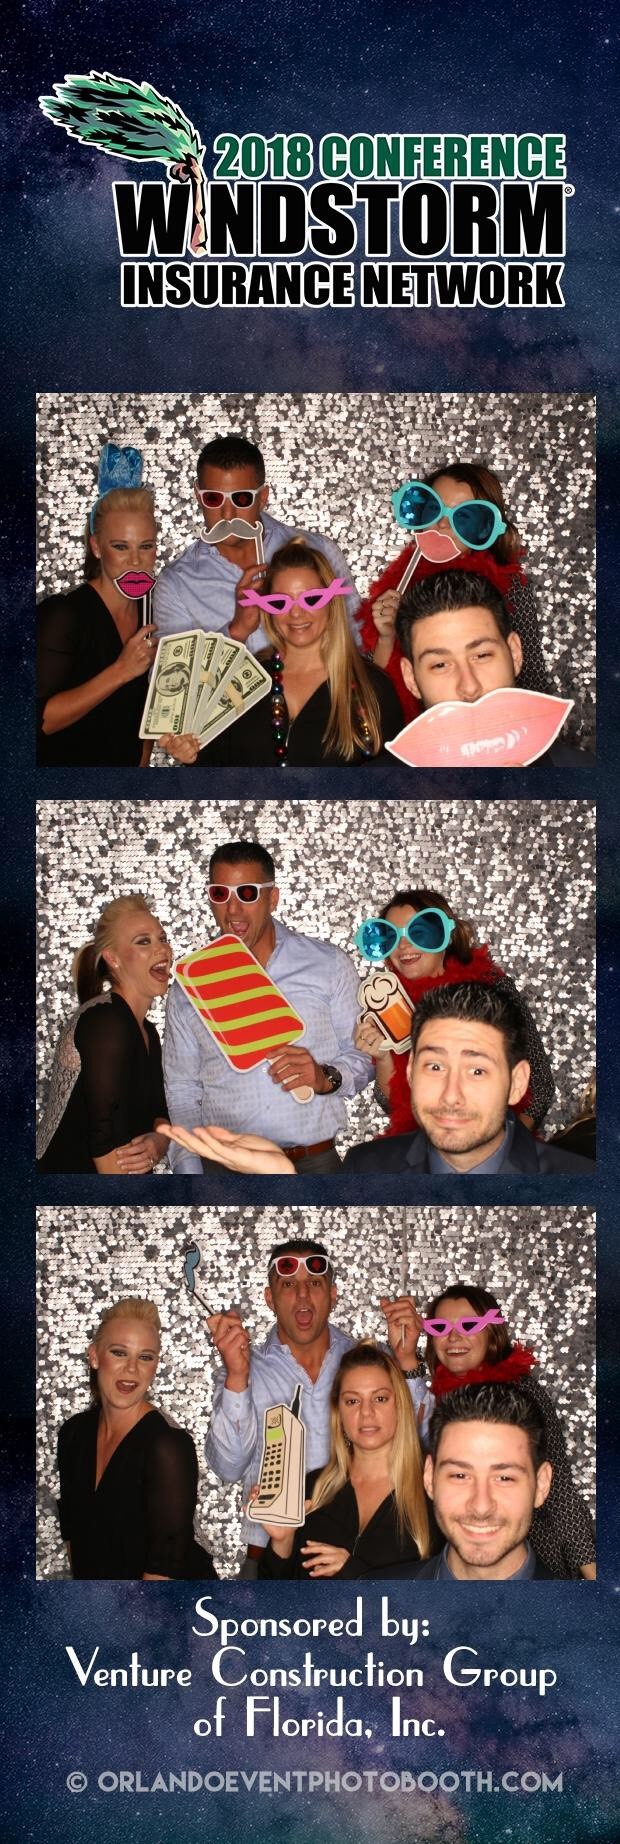 Venture Construction Group of Florida: WindStorm Insurance Conference Photo Booth Sponsor